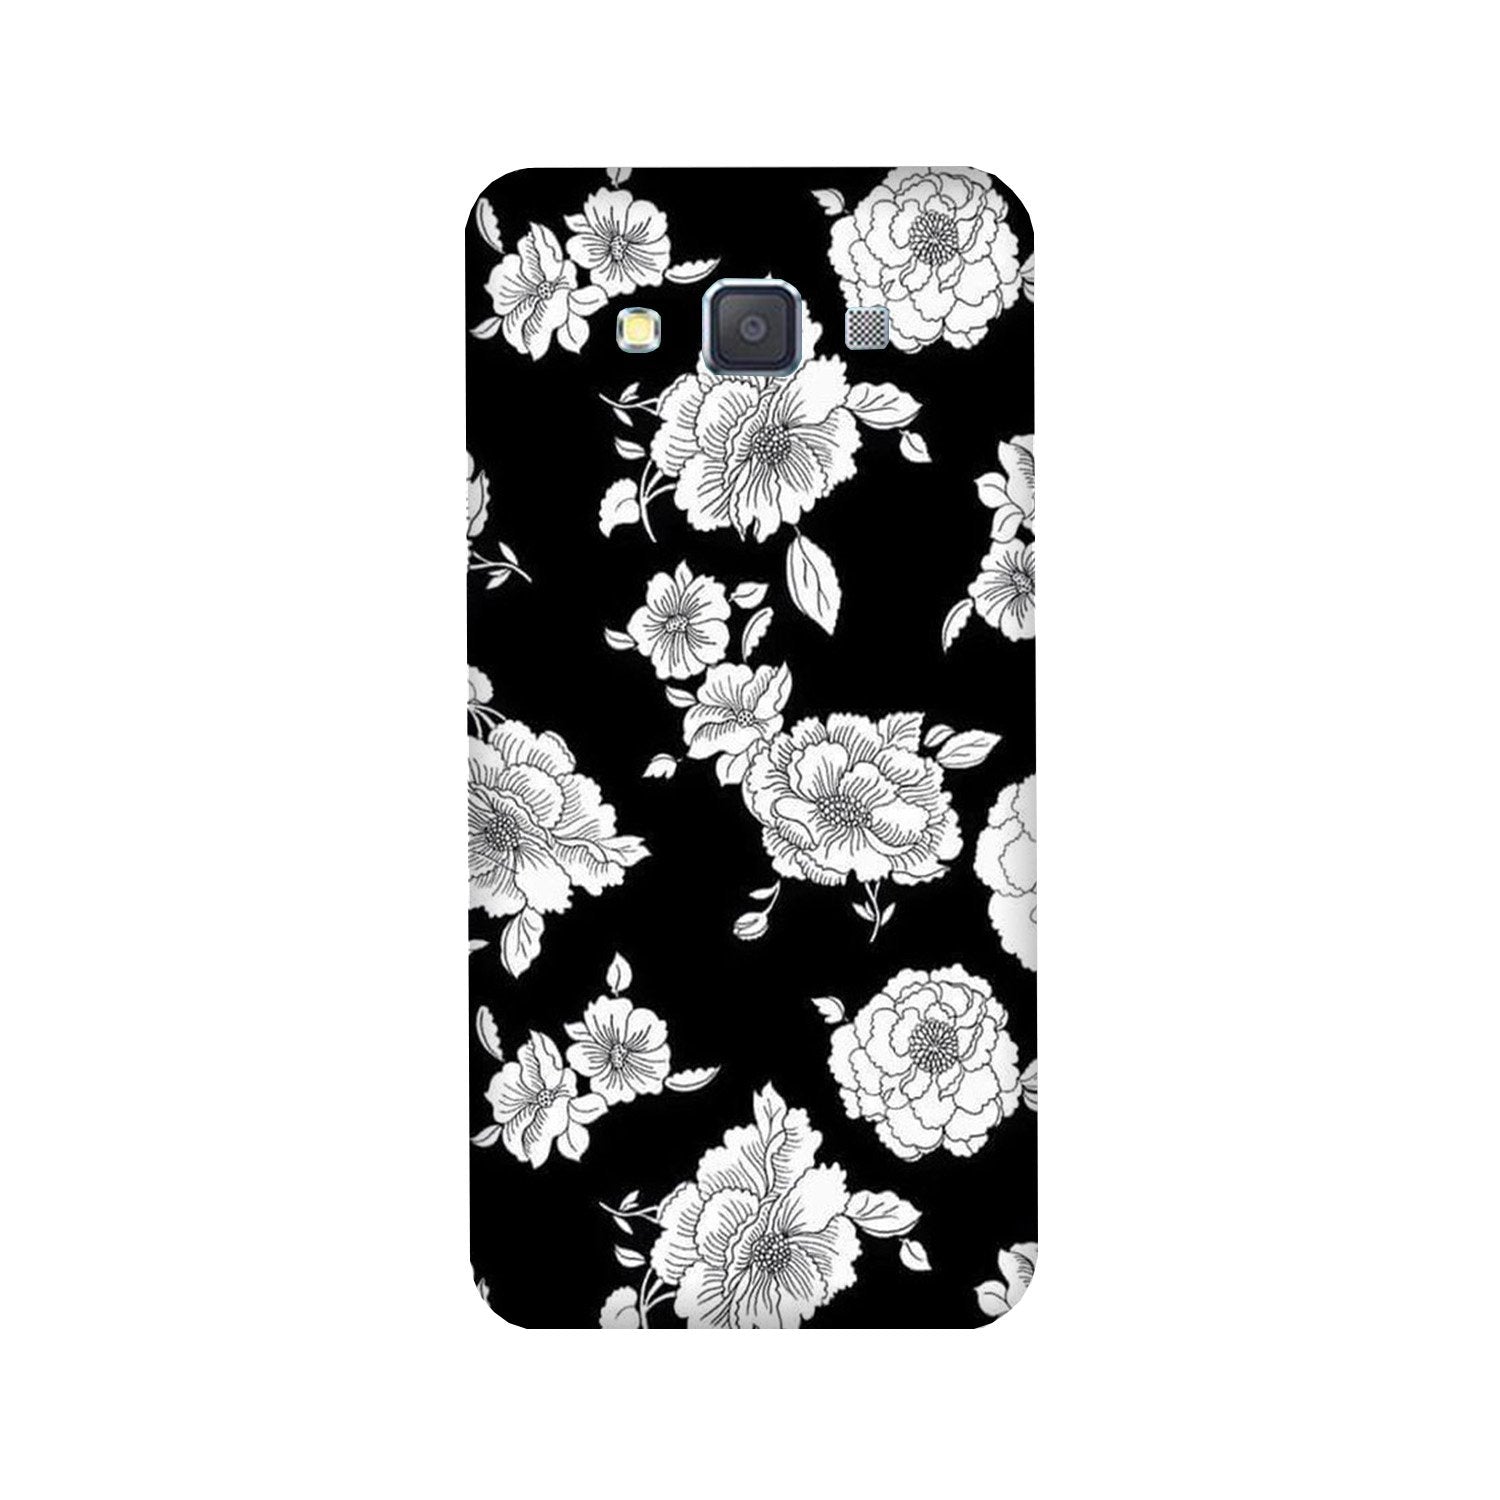 White flowers Black Background Case for Galaxy J5 (2016)